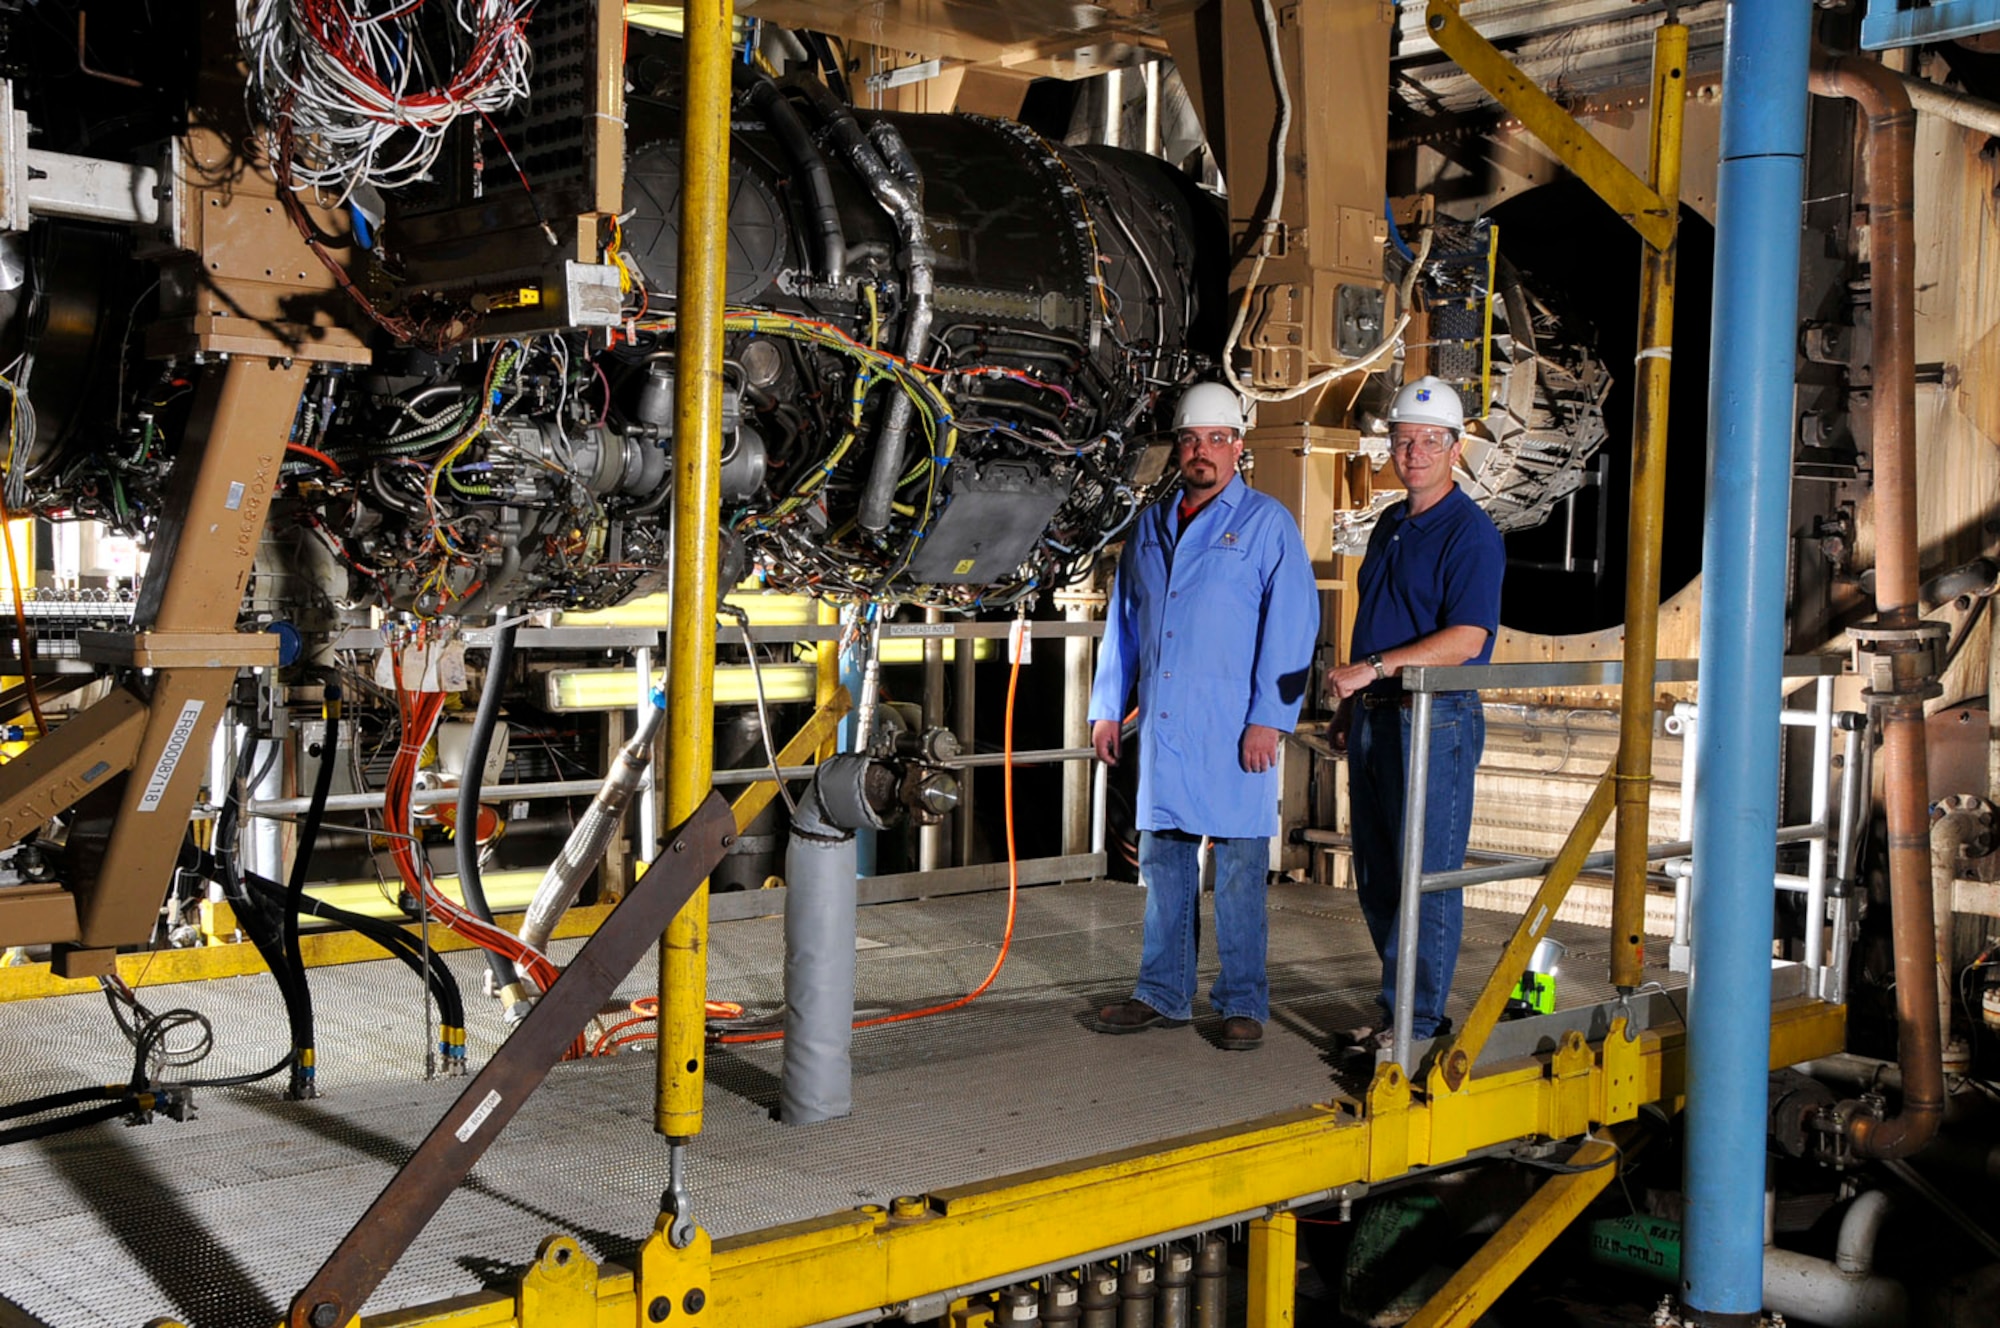 From left, Greg Crabtree, ATA outside machinist, and Jeff Dodd, ATA project manager on the test, stand in front of an F135 engine undergoing validation and altitude development testing in AEDC’s altitude test cell C-1. The F135 engine is a Conventional Take Off and Landing and Carrier Variant (CTOL/CV) that has been designated for low rate initial production to the U.S. government for the F-35 Lightning II program. The engine has been modified and improved based on findings from the F-35 flight and ground test program. (Photo by Rick Goodfriend) 